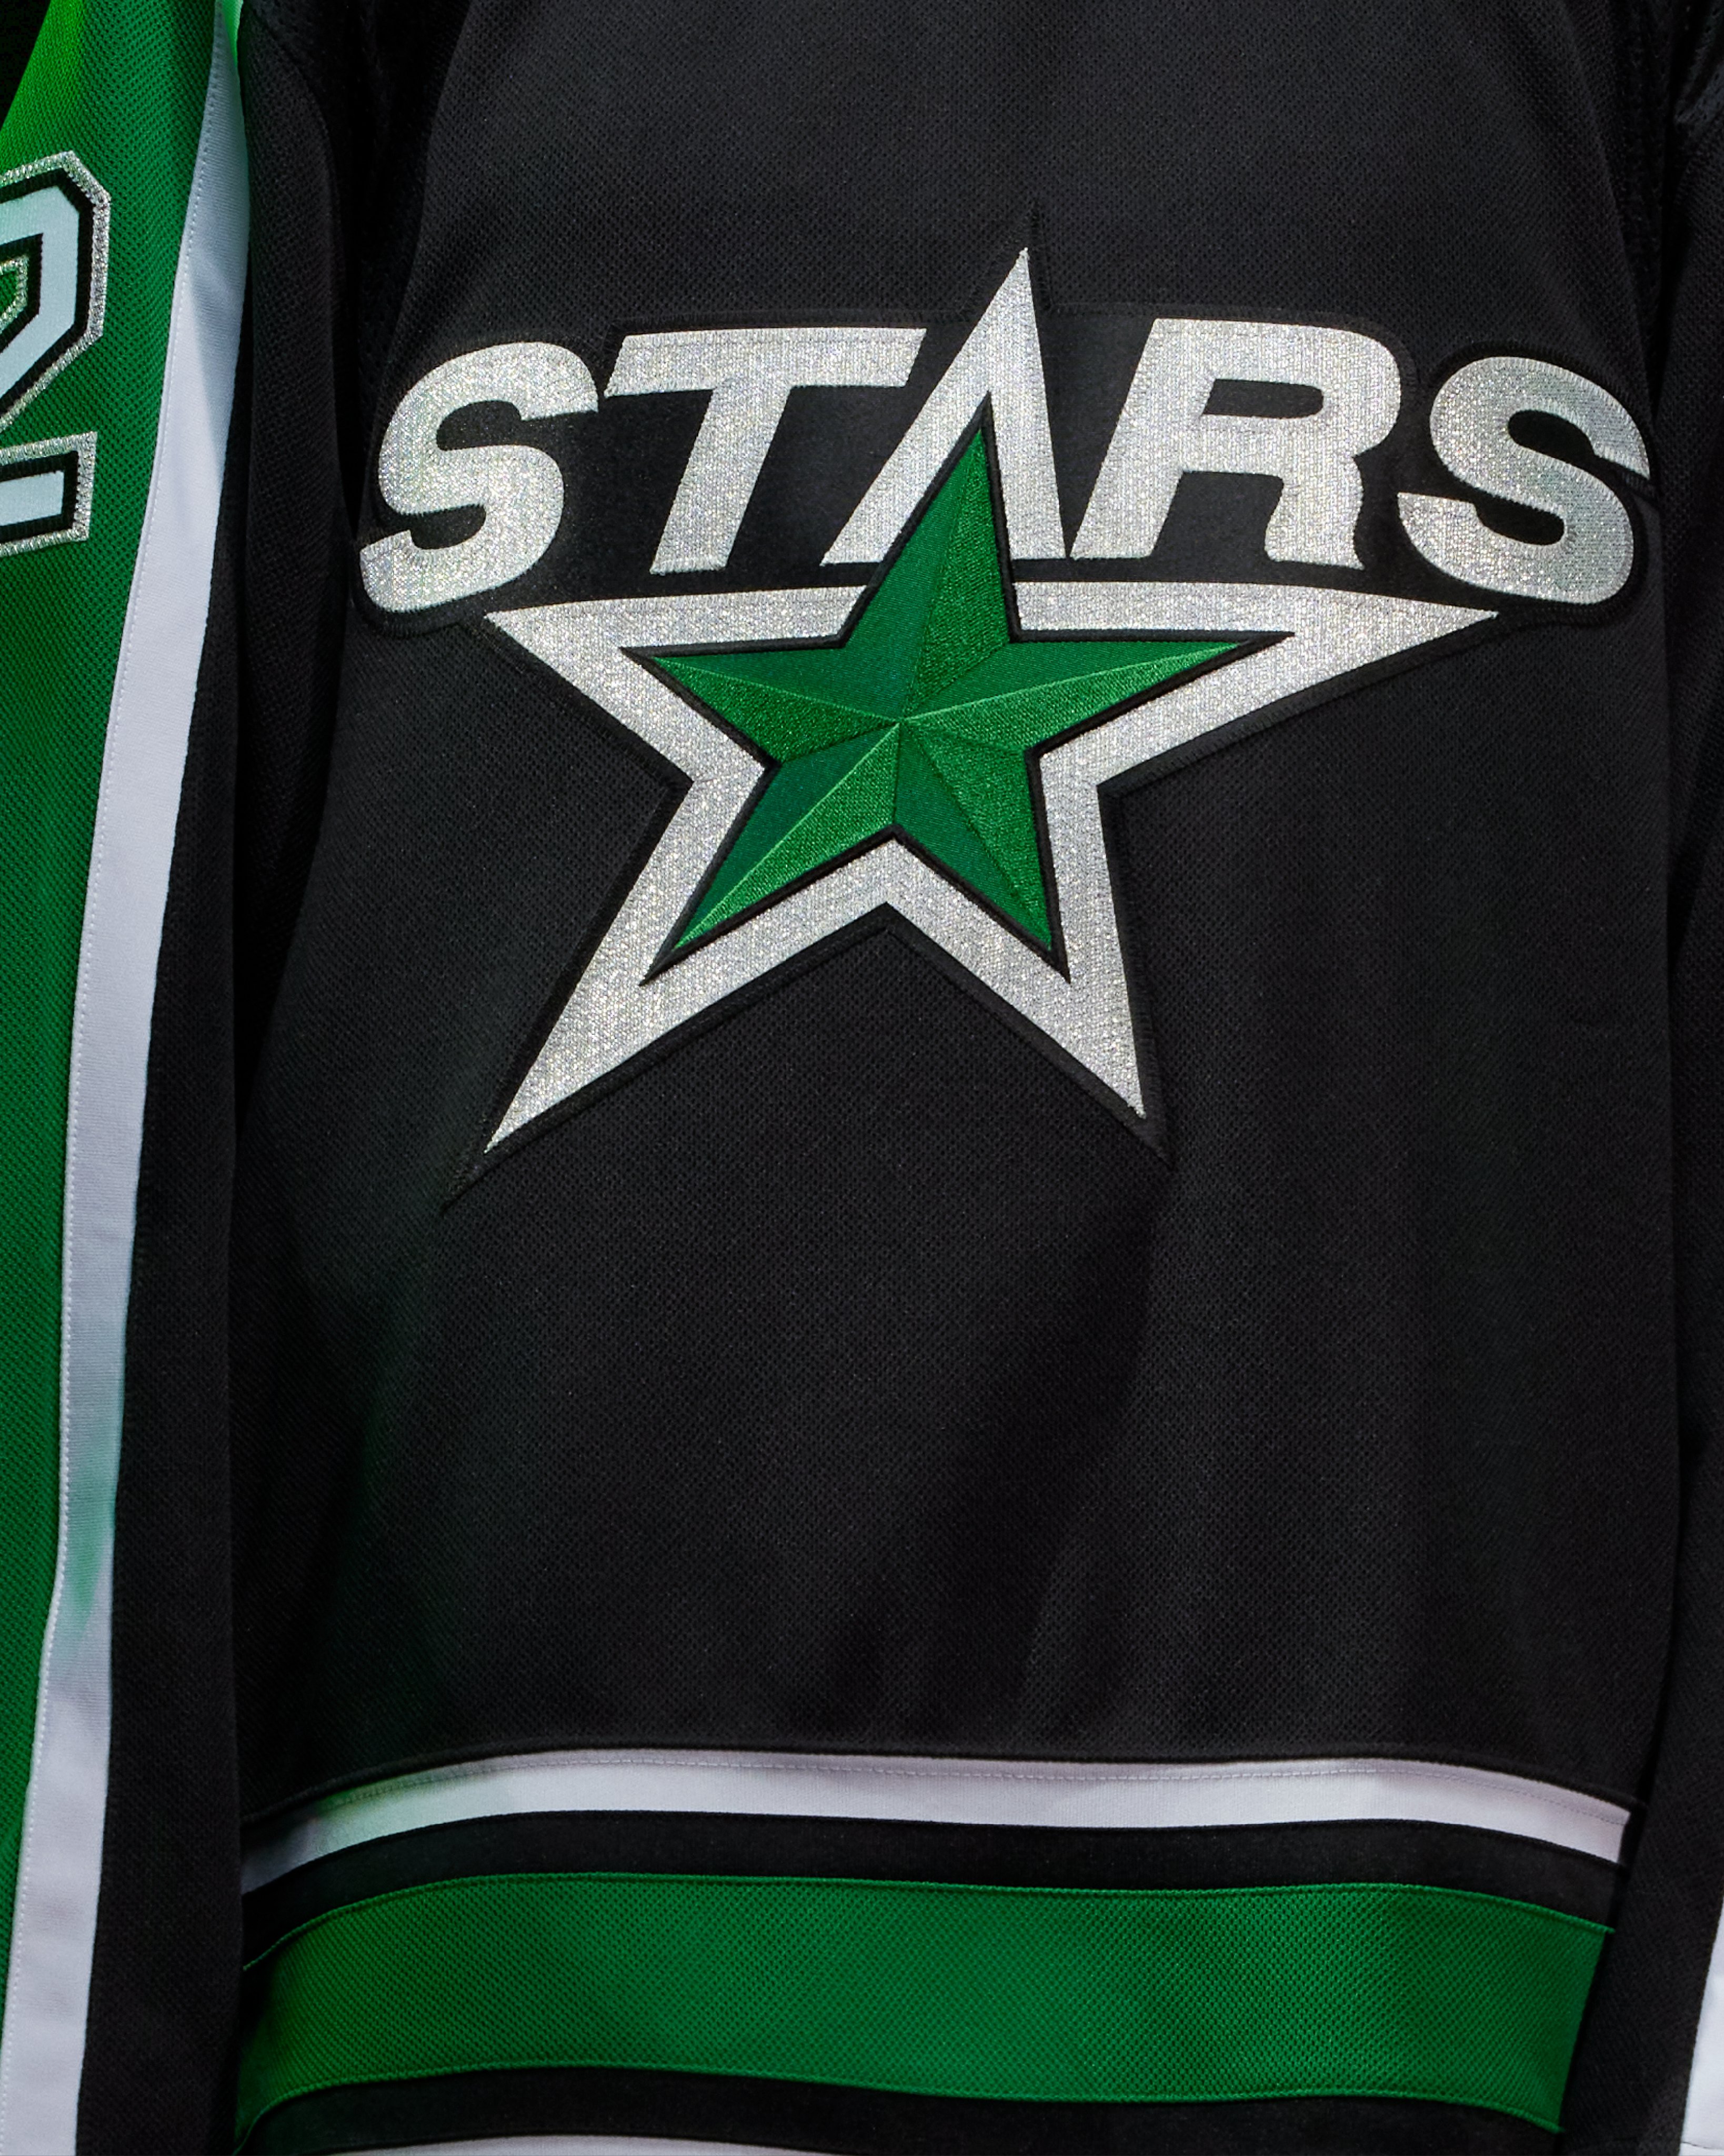 NHL on X: The @DallasStars have busted out the #ReverseRetro threads! ⭐️  The design honors their inaugural 1993-94 season and is remixed with the  club's current colorway with Victory Green plus white